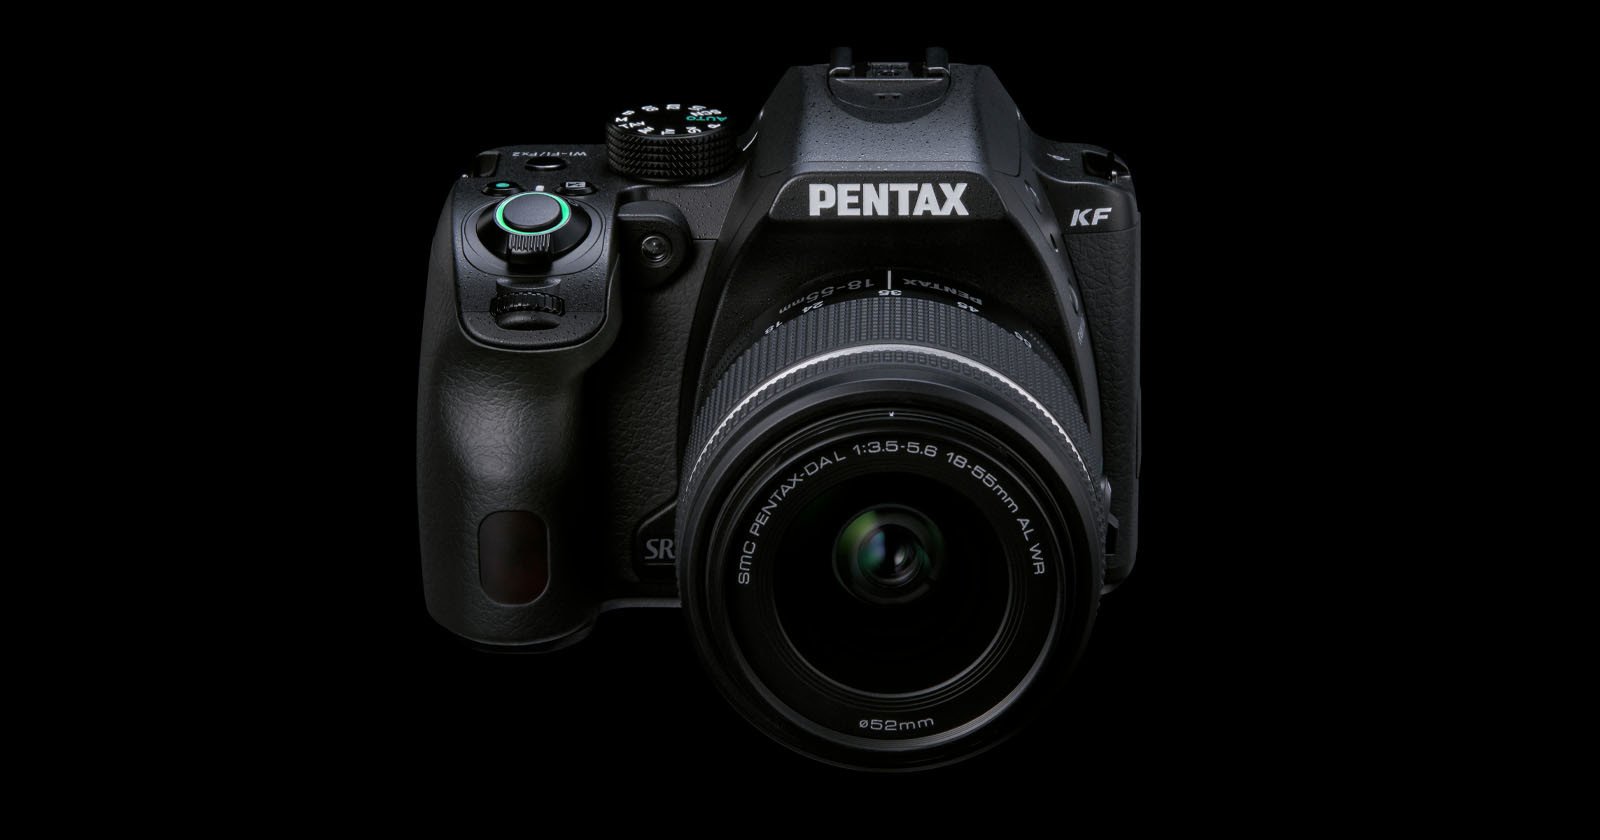 Ricohs New Pentax KF DSLR is a Largely Unchanged K-70 Re-Release